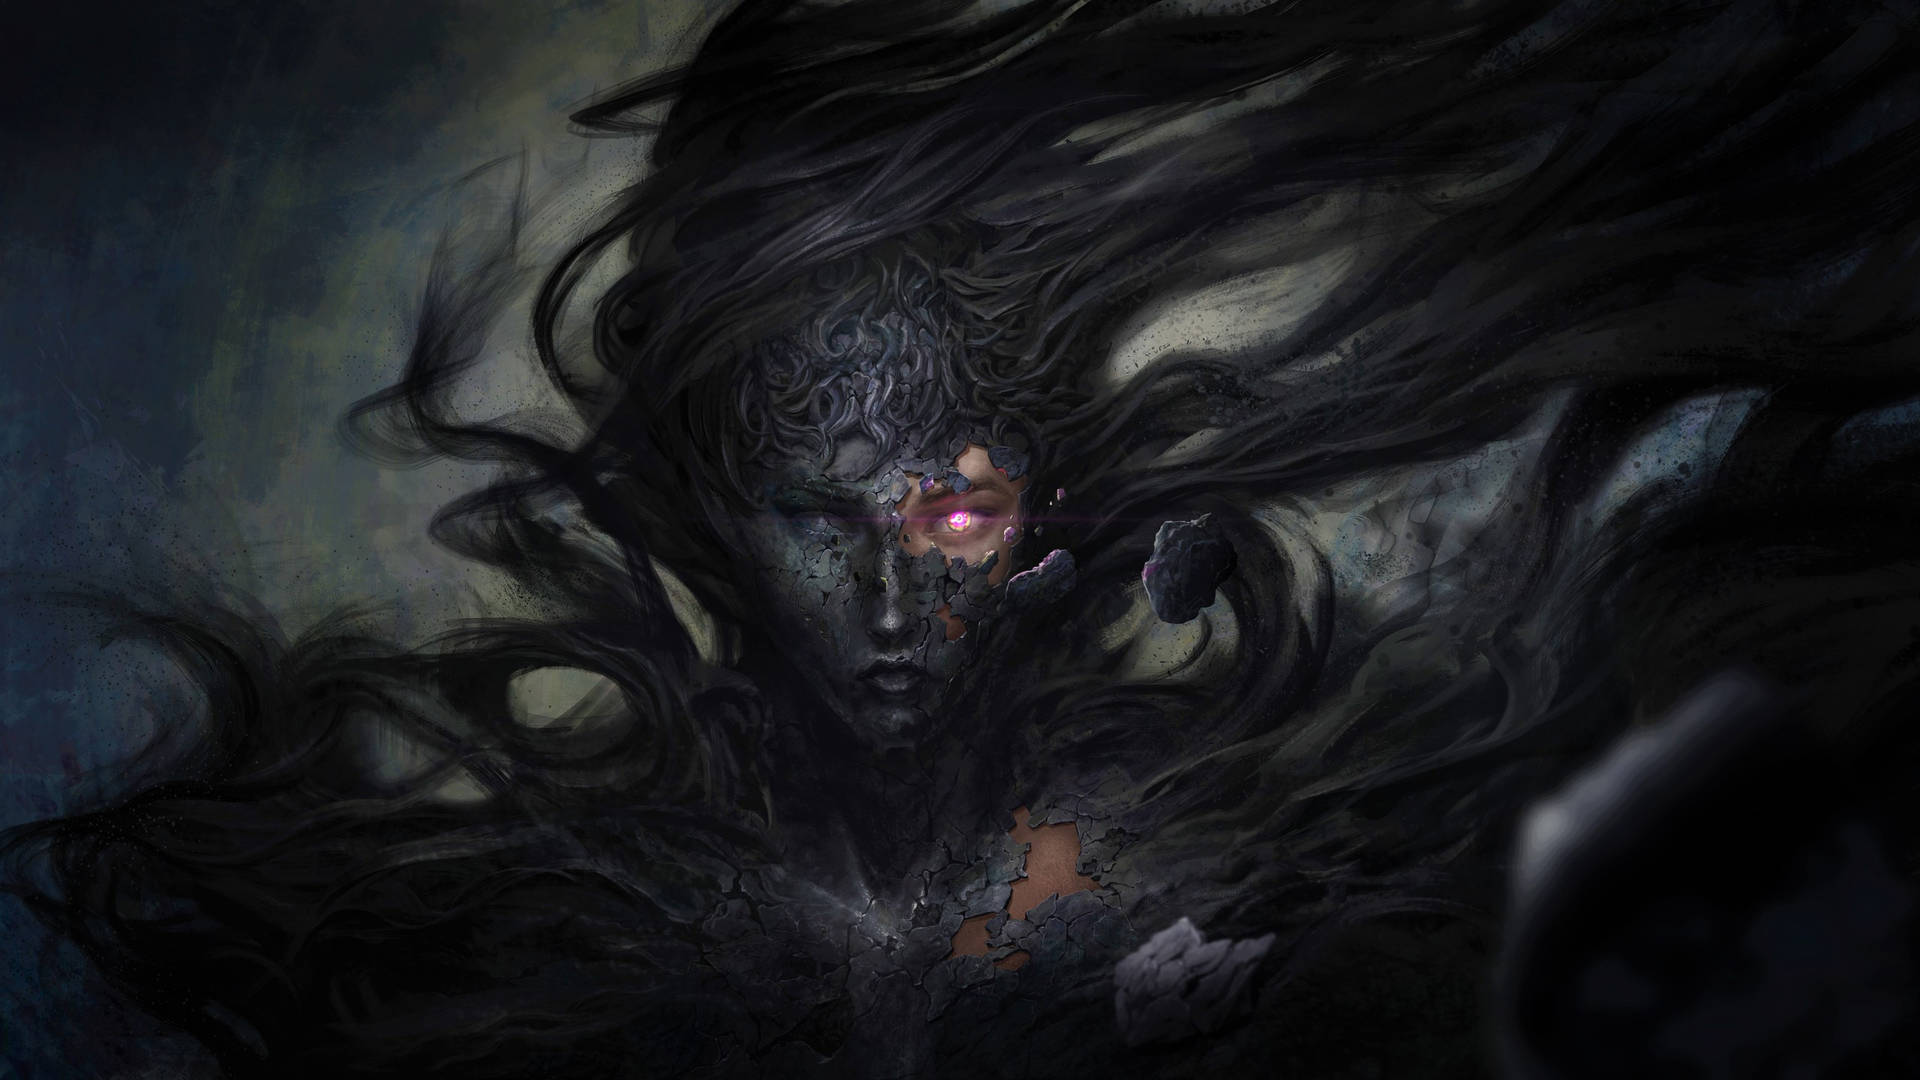 A Dark Image Of A Woman With Long Hair Wallpaper